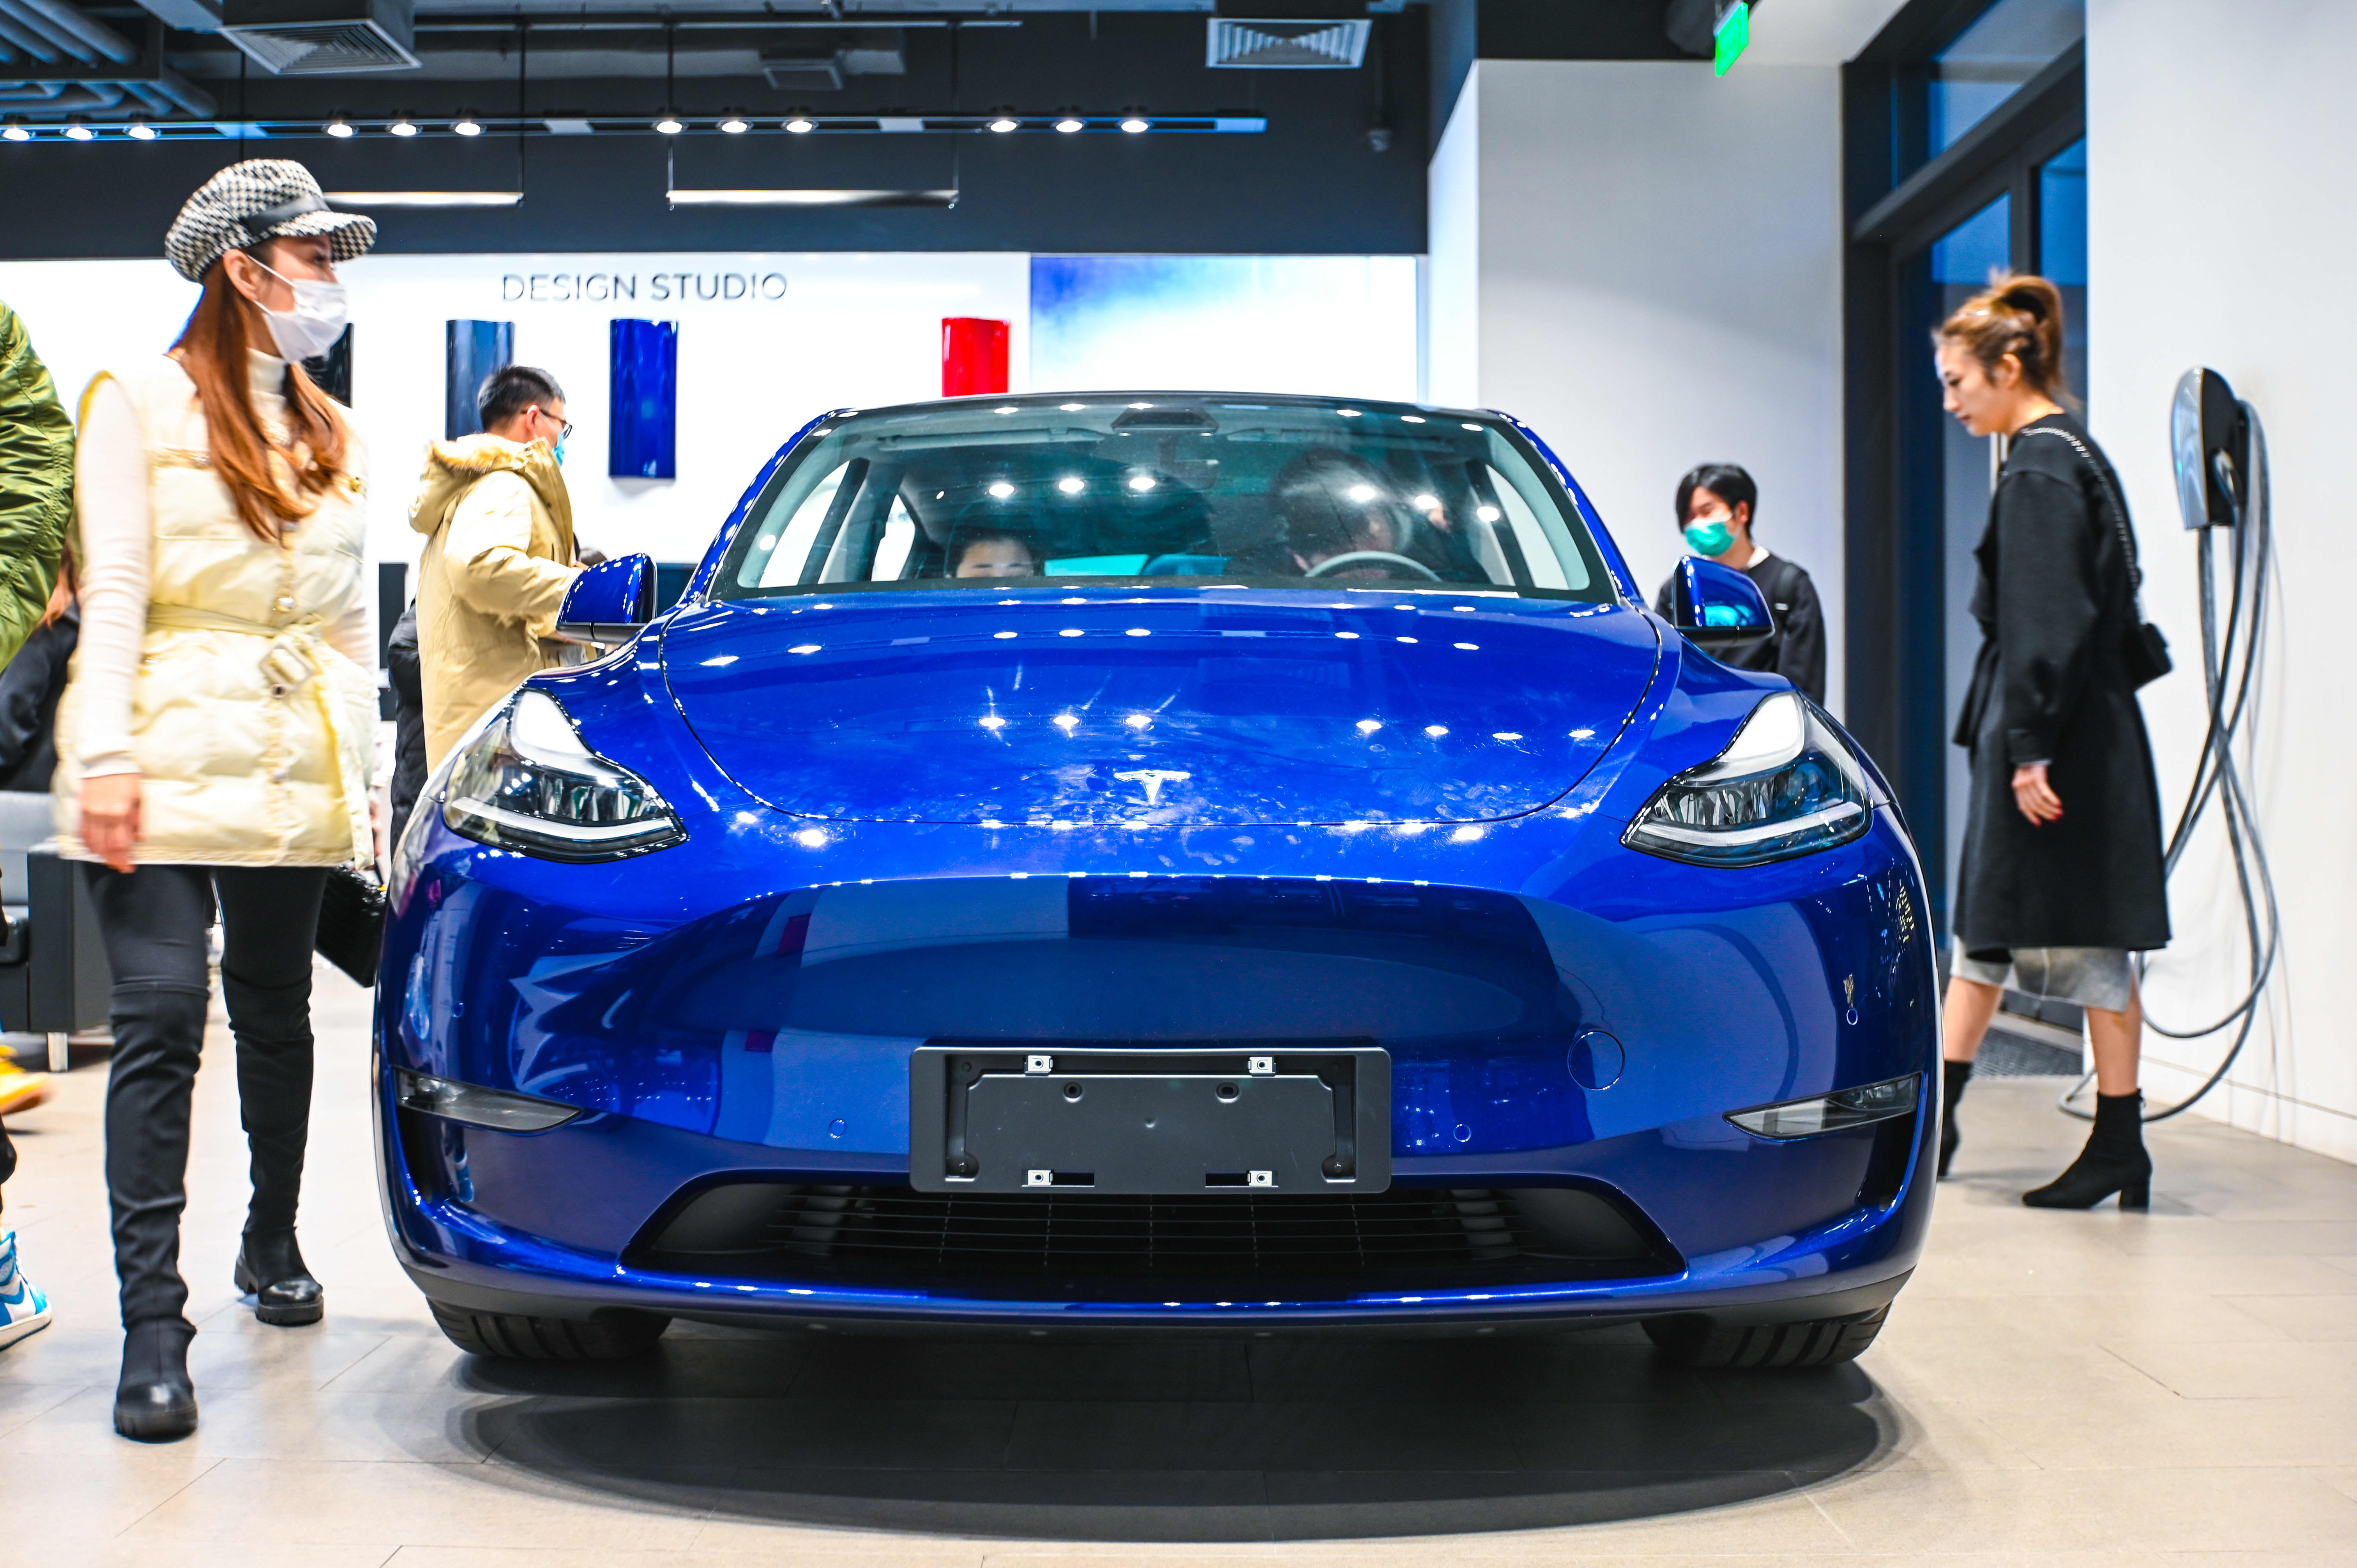 Tesla cars restricted among military personnel in China – reported